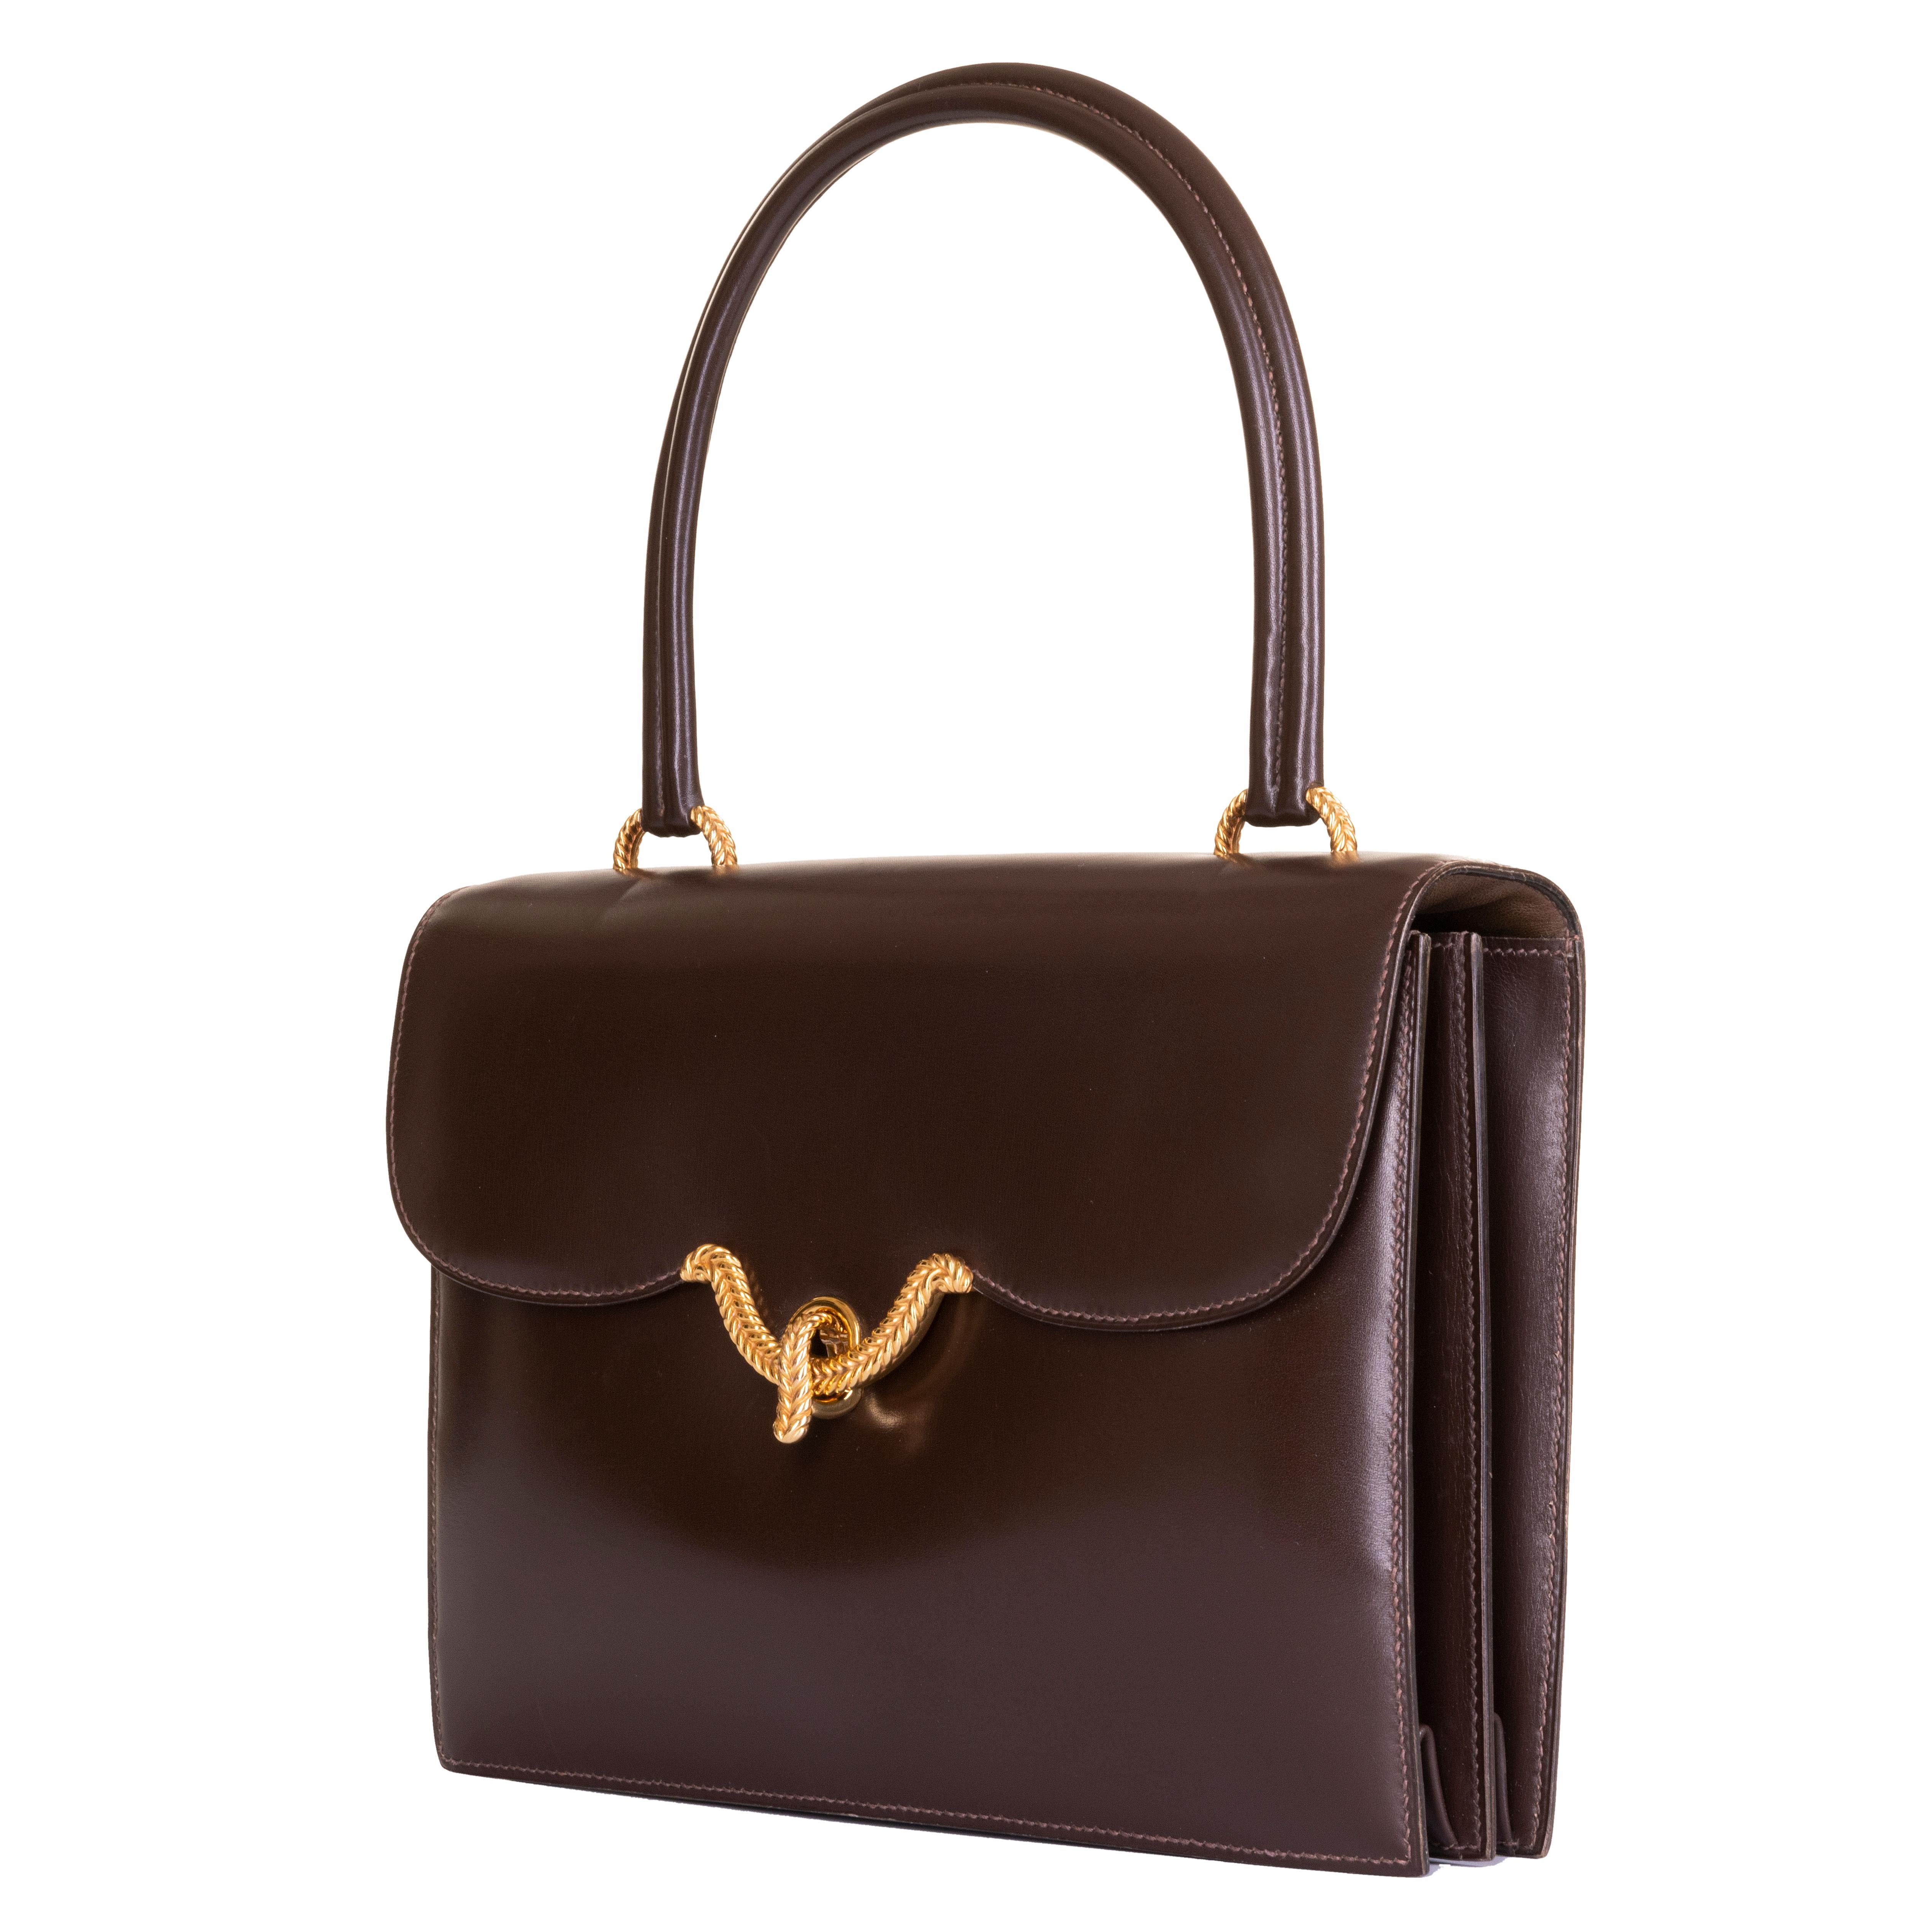 In excellent condition throughout, the 'Sac Cordeliere' is a rare vintage Hermes Handbag. This exquisite example is finished in Chocolate brown Box leather with 18ct. gold-plated hardware. Very lightly used, the bag is from a private collection in